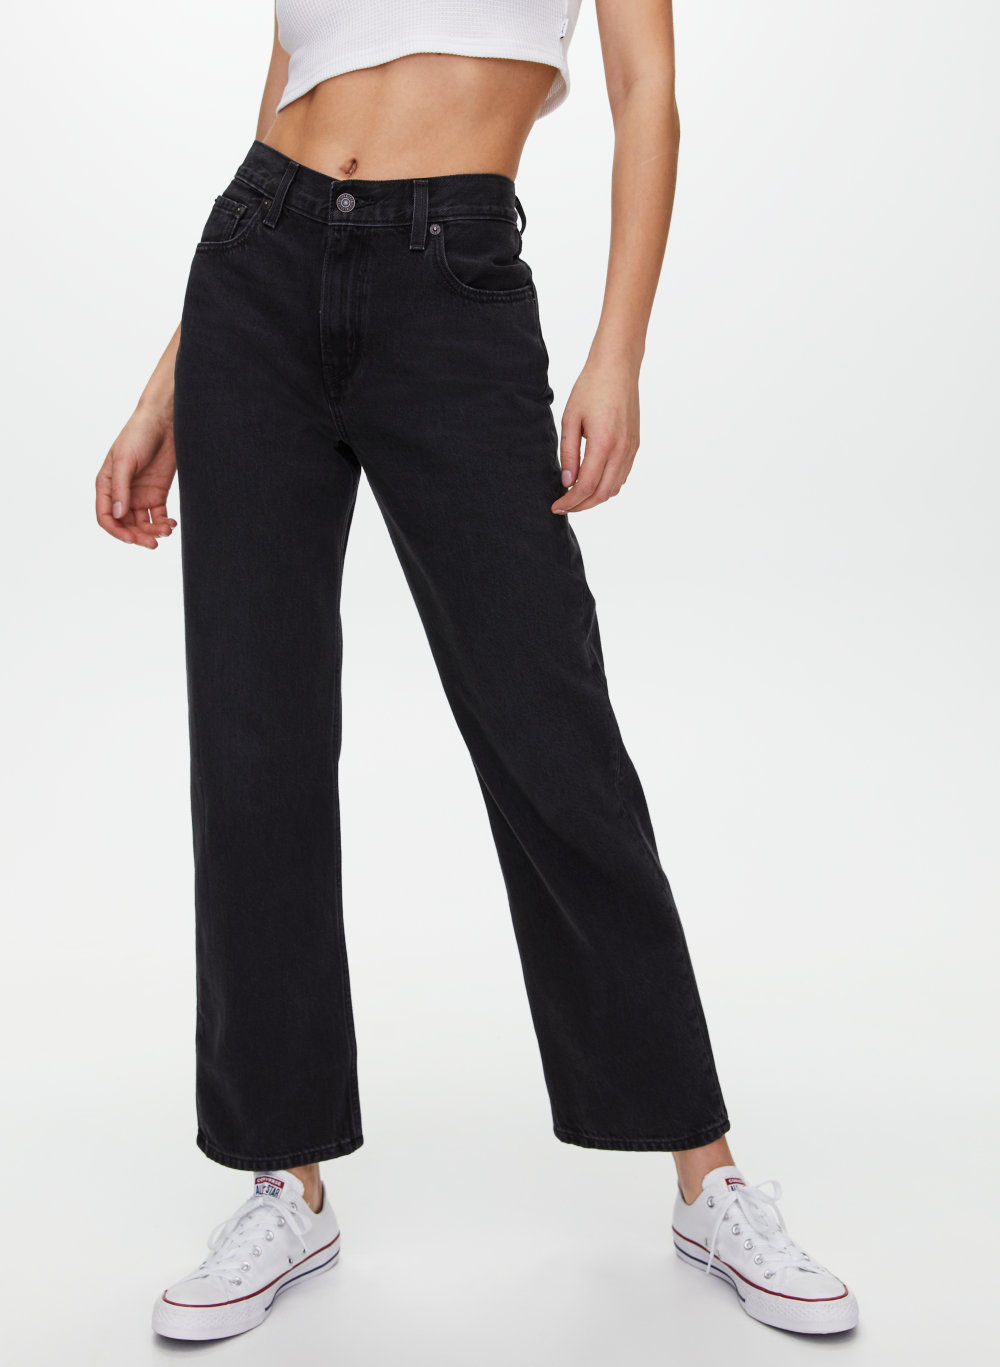 Loose Straight Jeans Levi's Outlet, SAVE 31% 